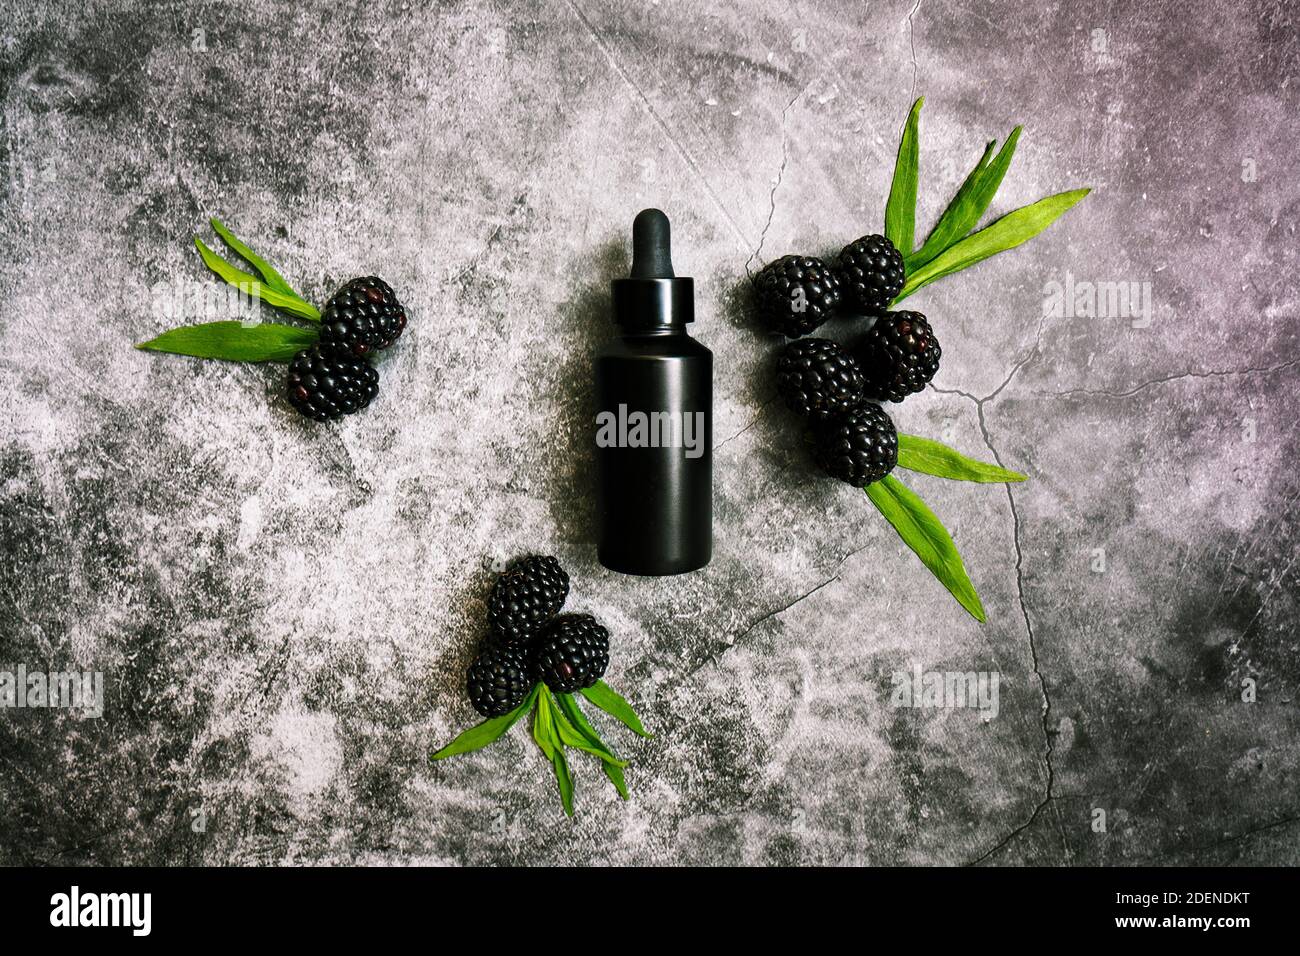 Black bottle of men's facial anti-aging serum on a dark grunge cement background surrounded by blackberries rich in antioxidants. Stock Photo